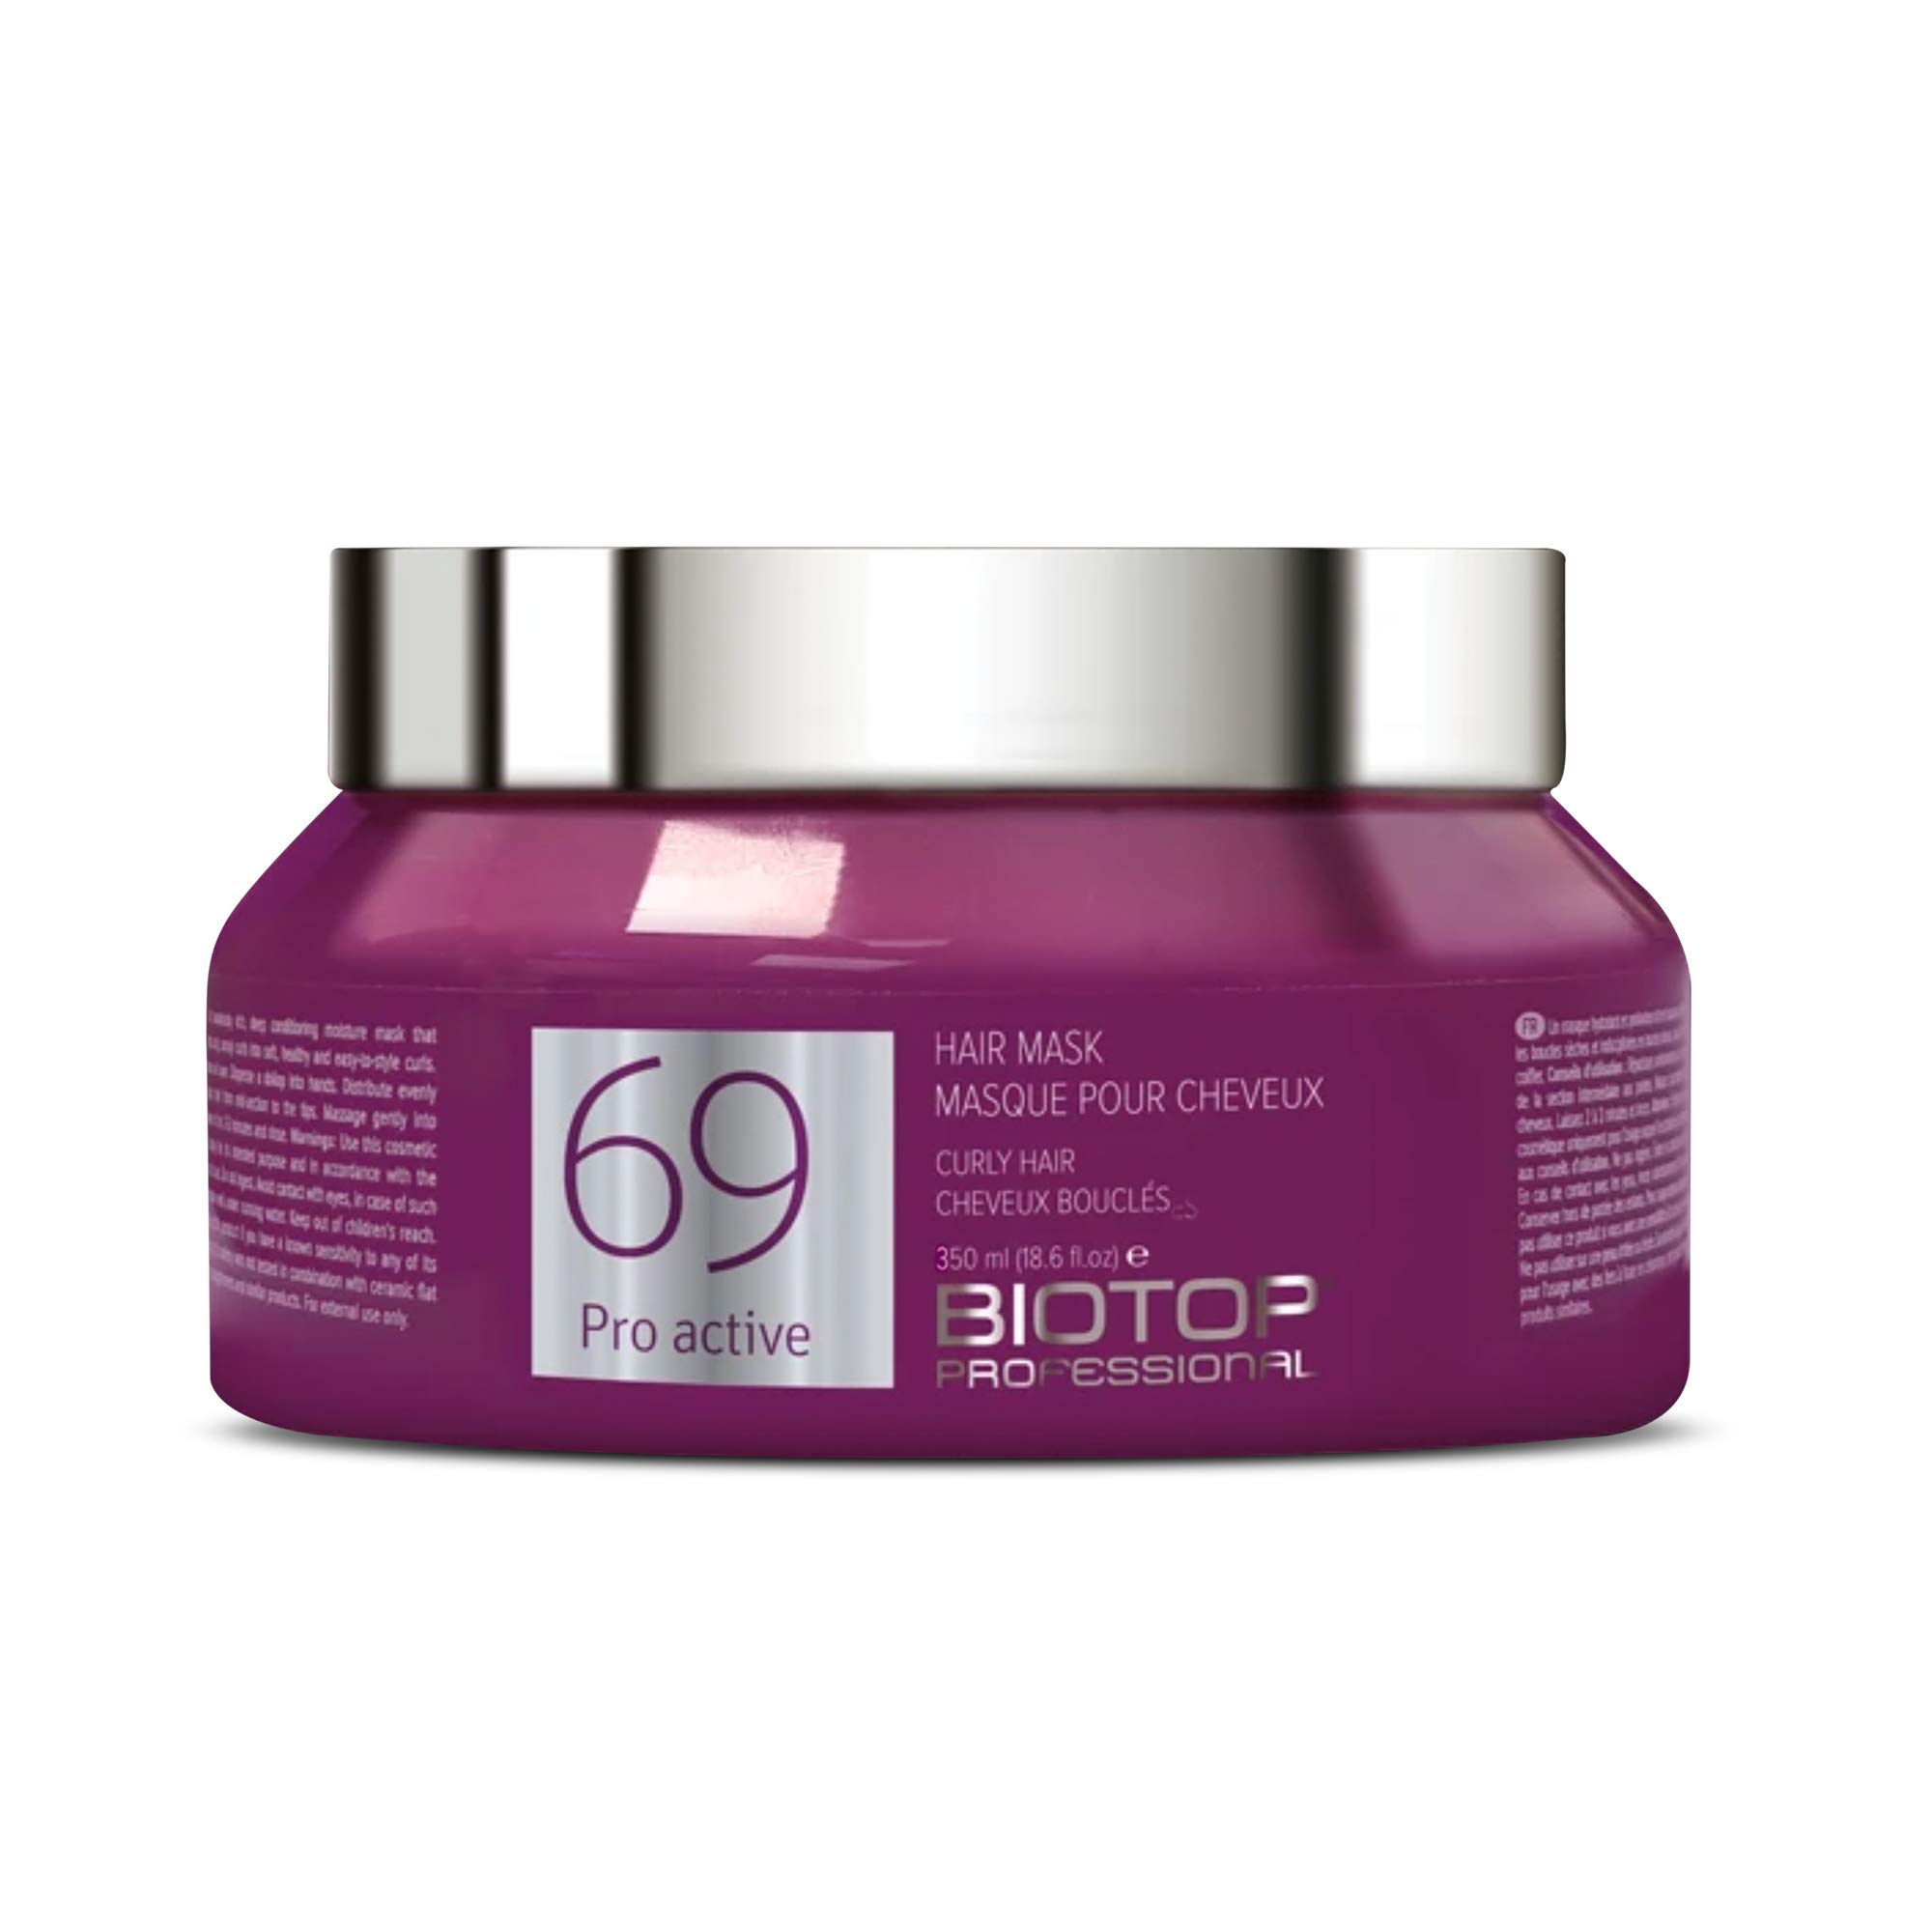 Biotop Professional 69 Pro Active Hair Mask for Curly and Wavy Hair Types 18.6 oz